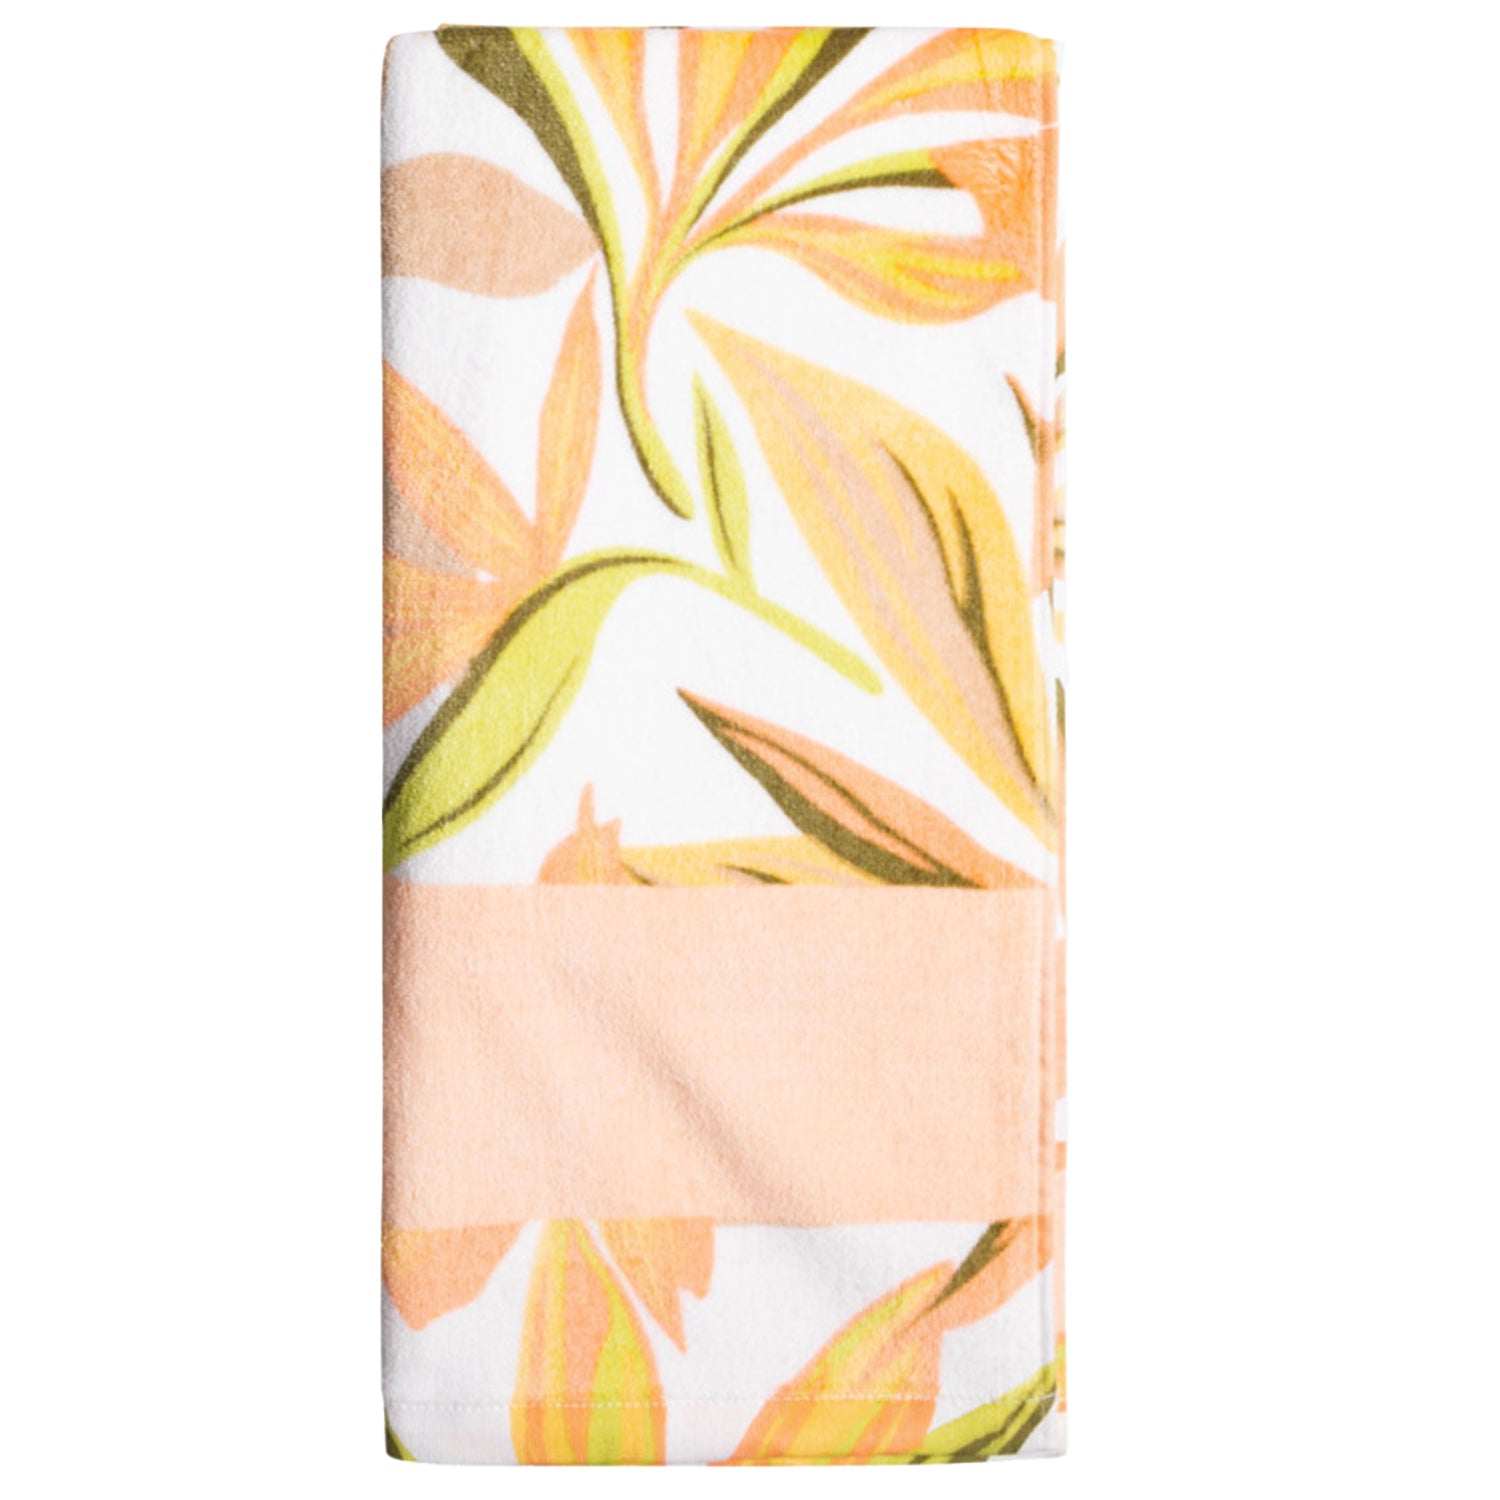 Roxy | Cold Water Printed Towel - Bright White Subtly Salty Mult